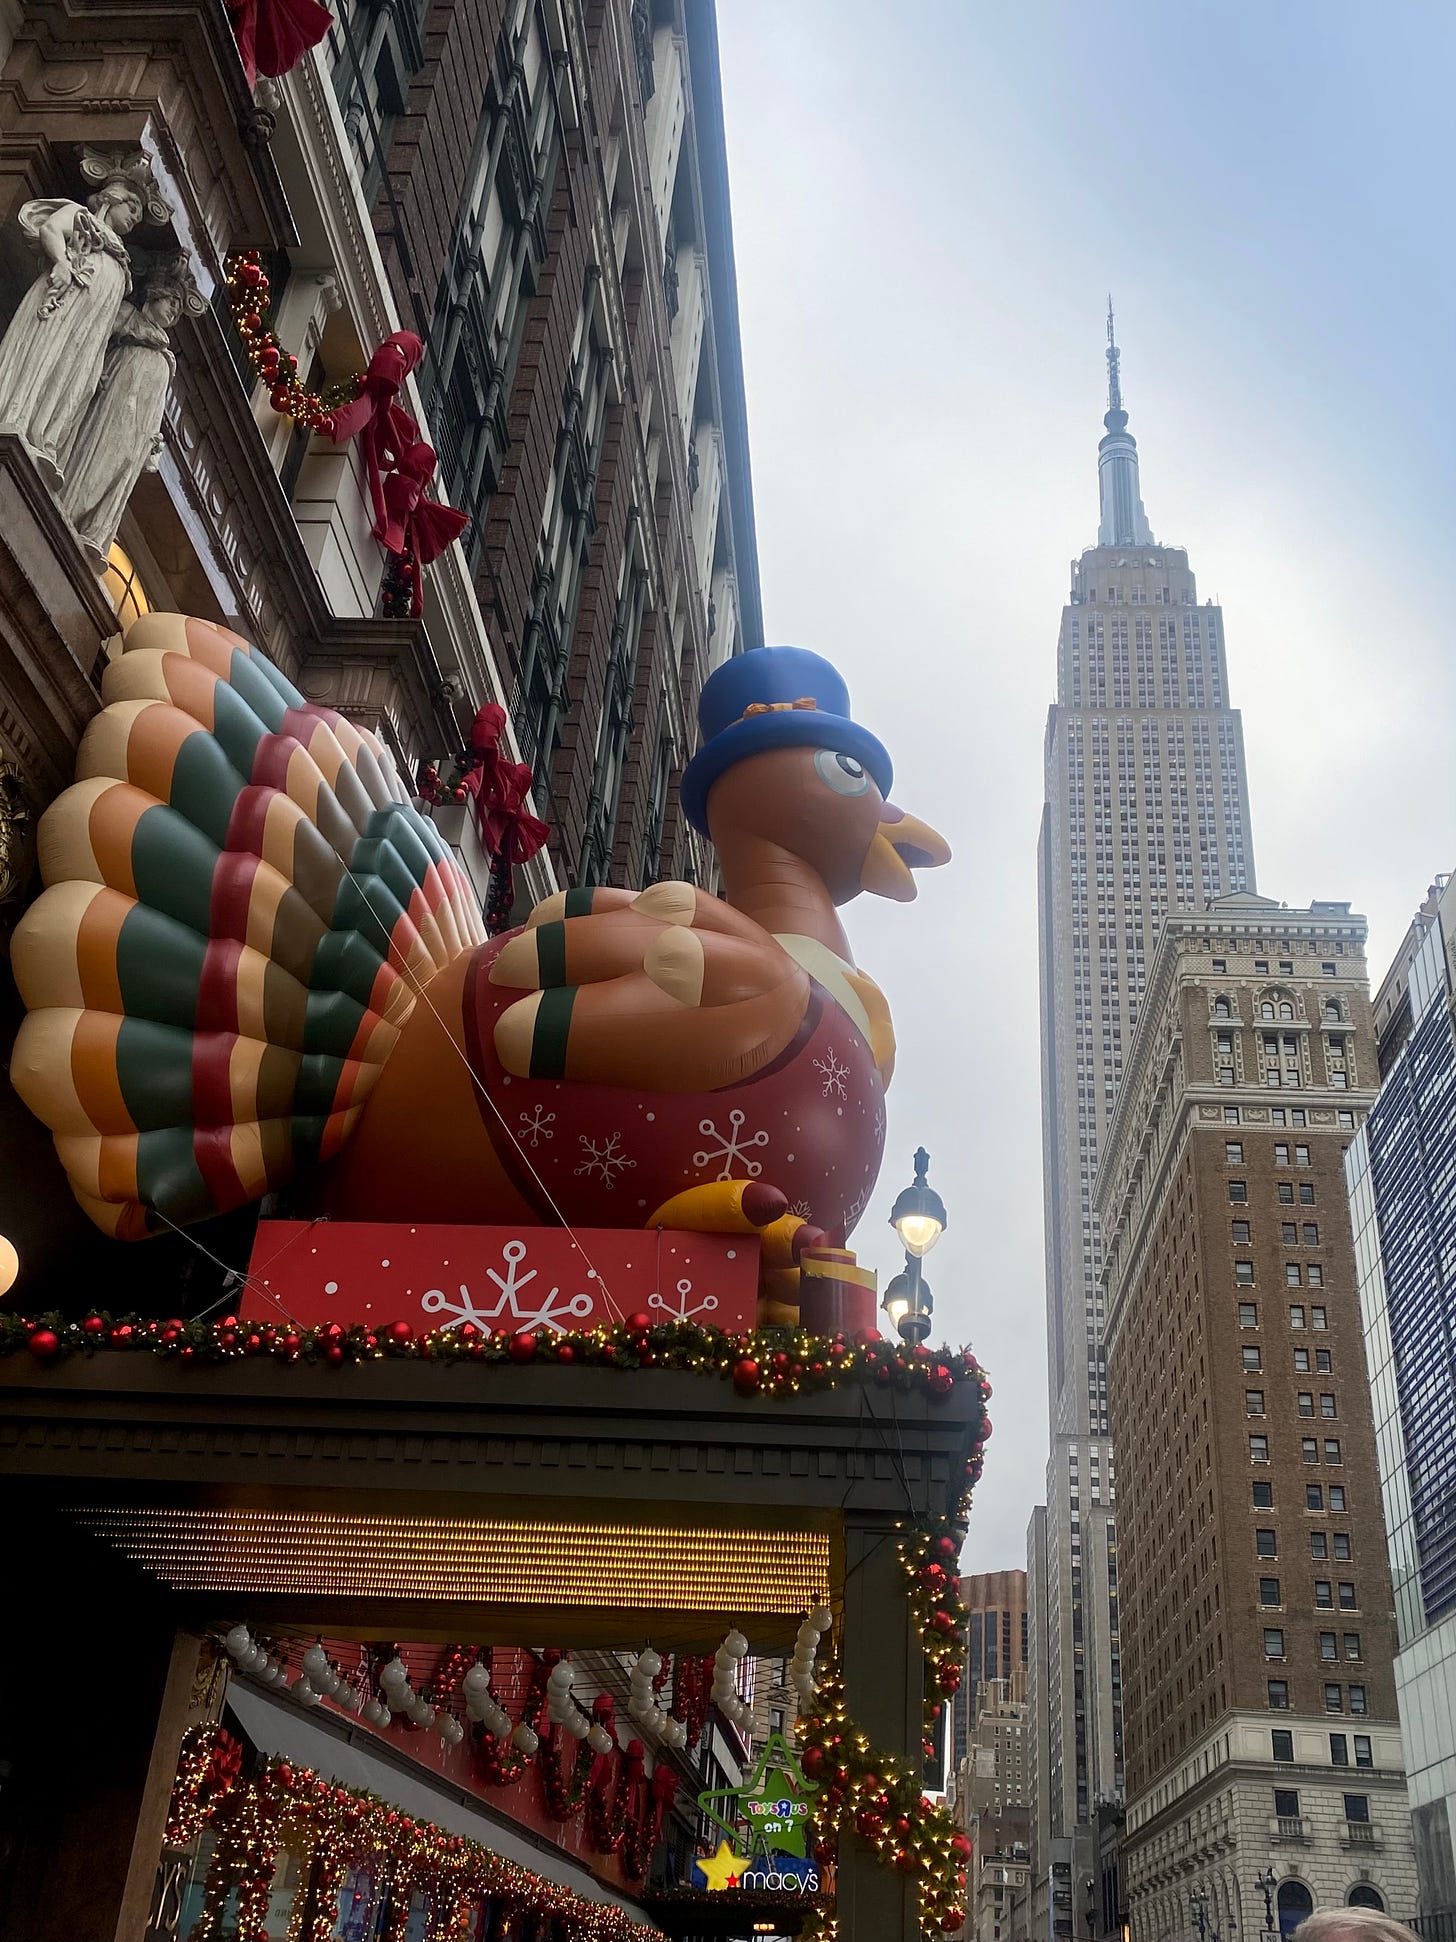 The entrance of Macy's with a giant decorative turkey over the entrance looking towards the Empire State Building.